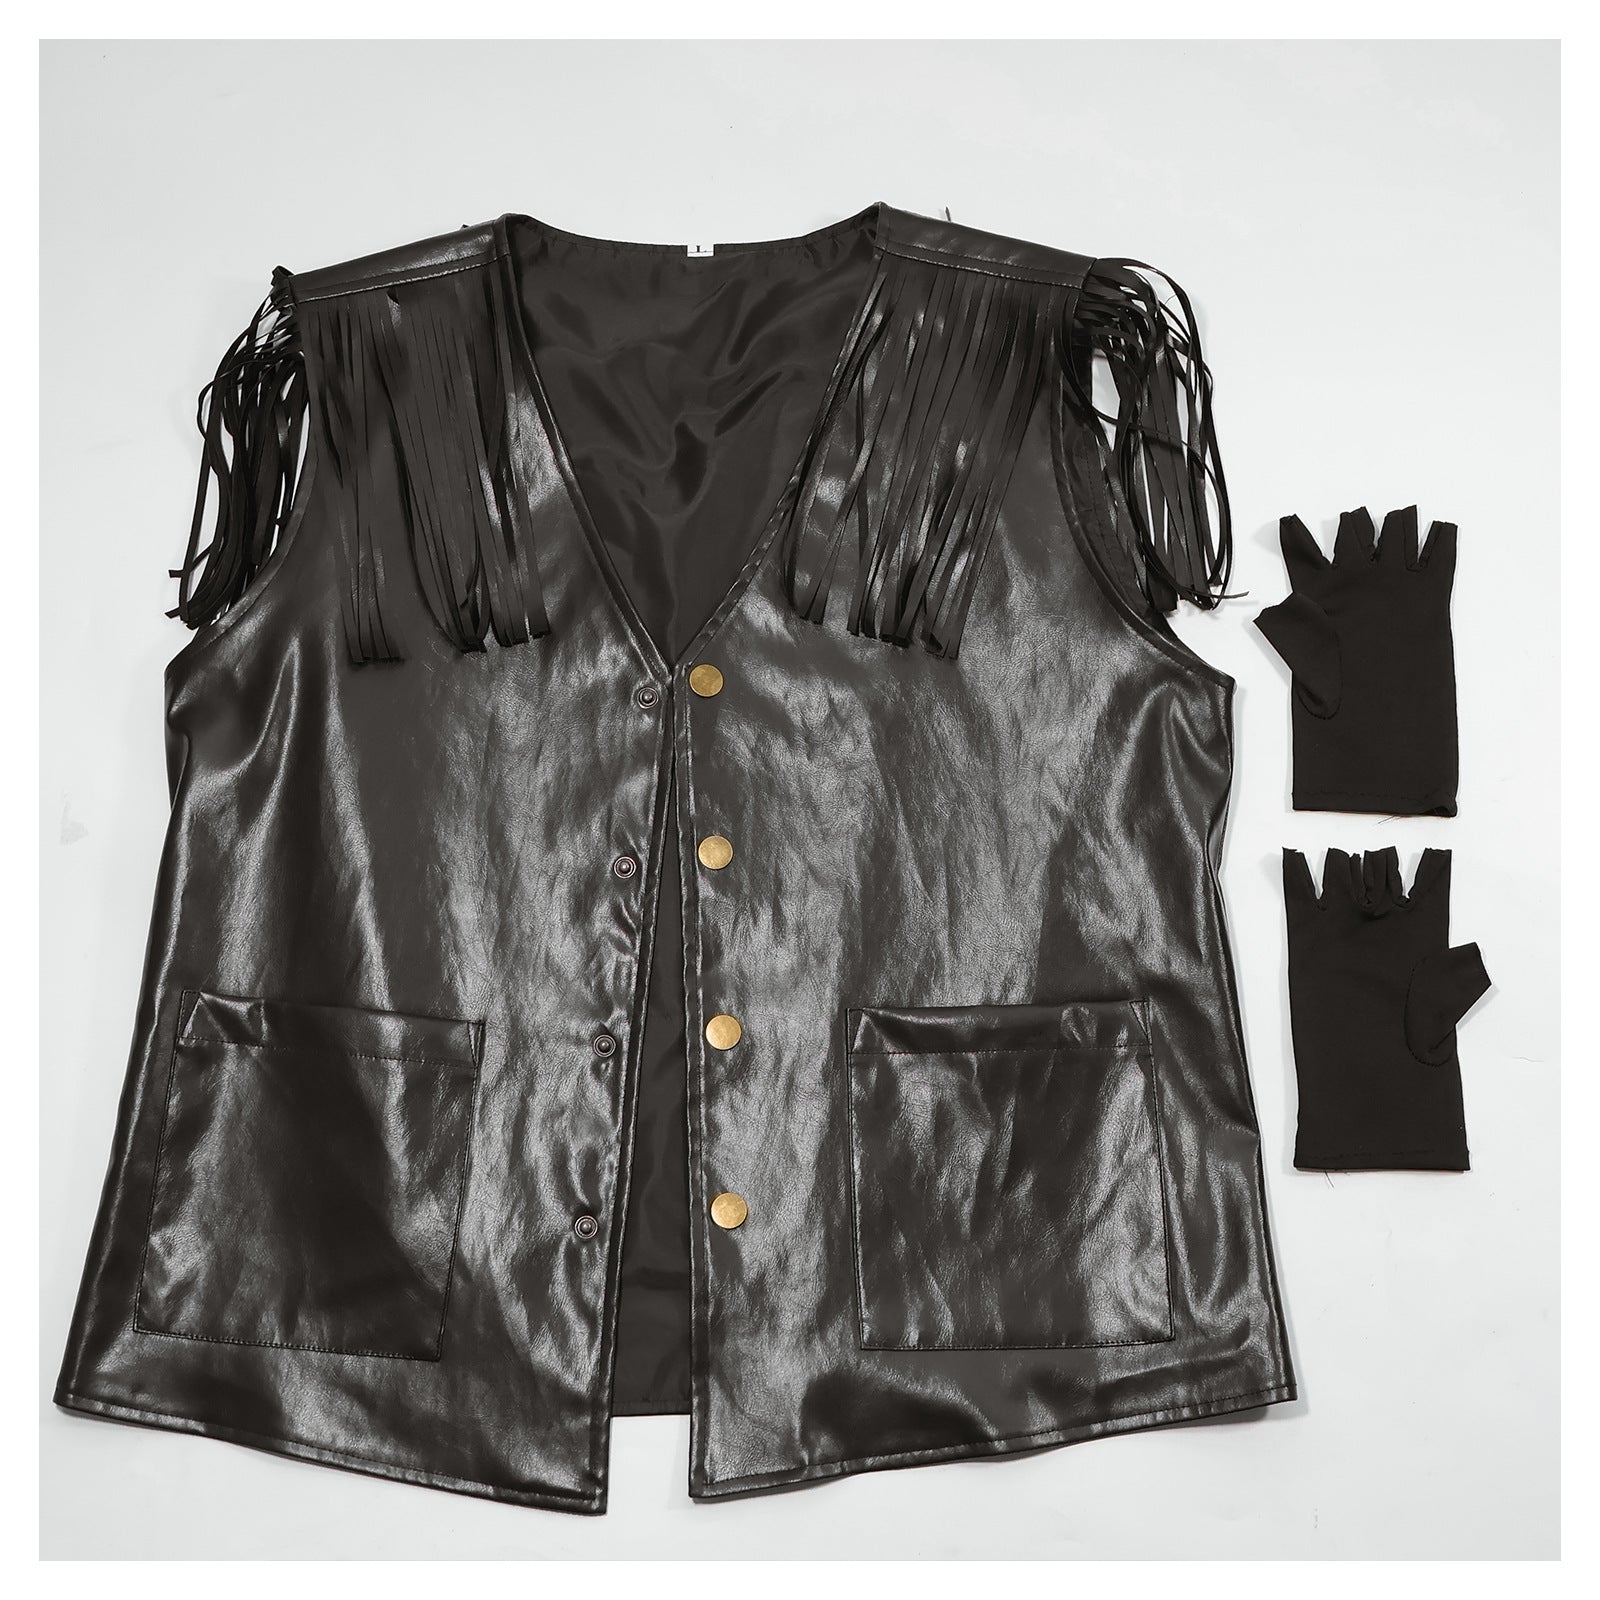 A Maramalive™ European Retro Vest For Men with fringe detailing and button closure, laid flat next to a pair of black fingerless gloves, offering a chic touch reminiscent of Harajuku style.